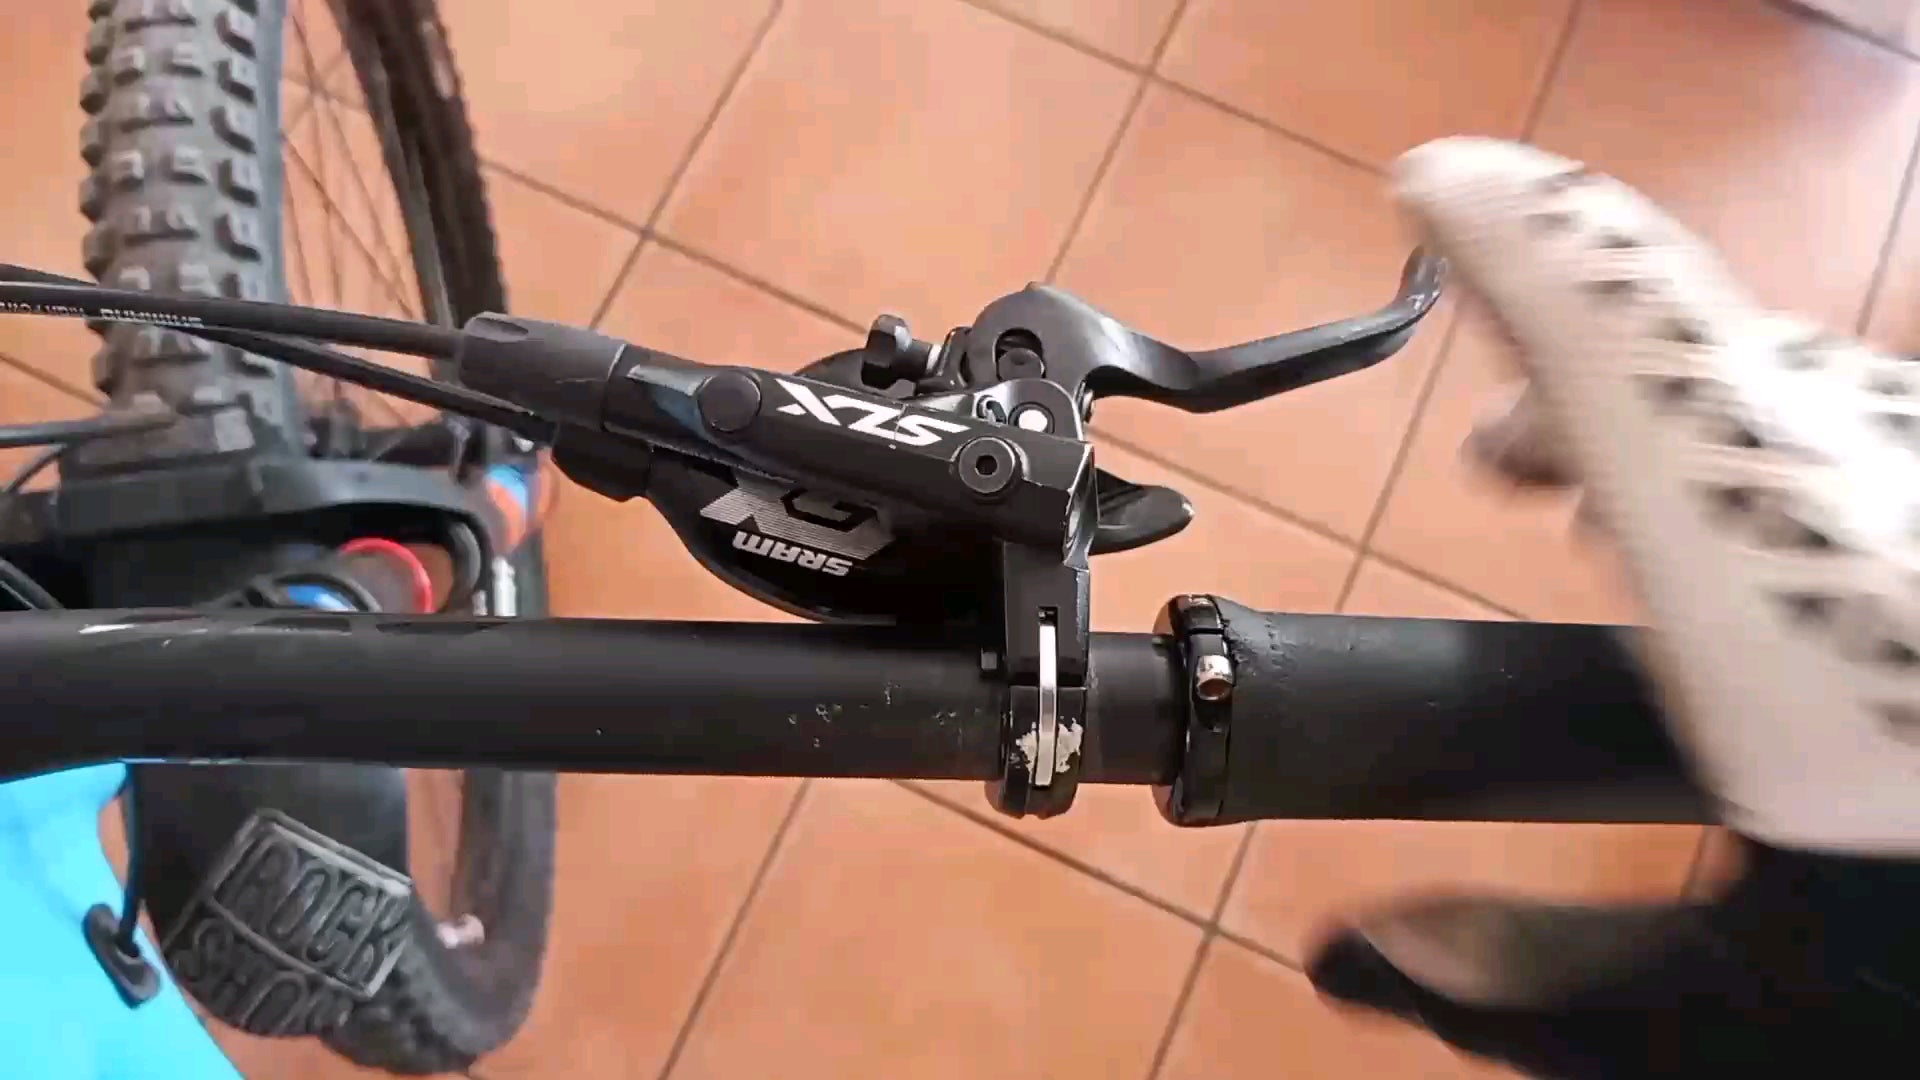 So i had my brakes bled twice at 2 different shops within a week but the rear (second one) still feels spongy is this normal? : mountainbiking